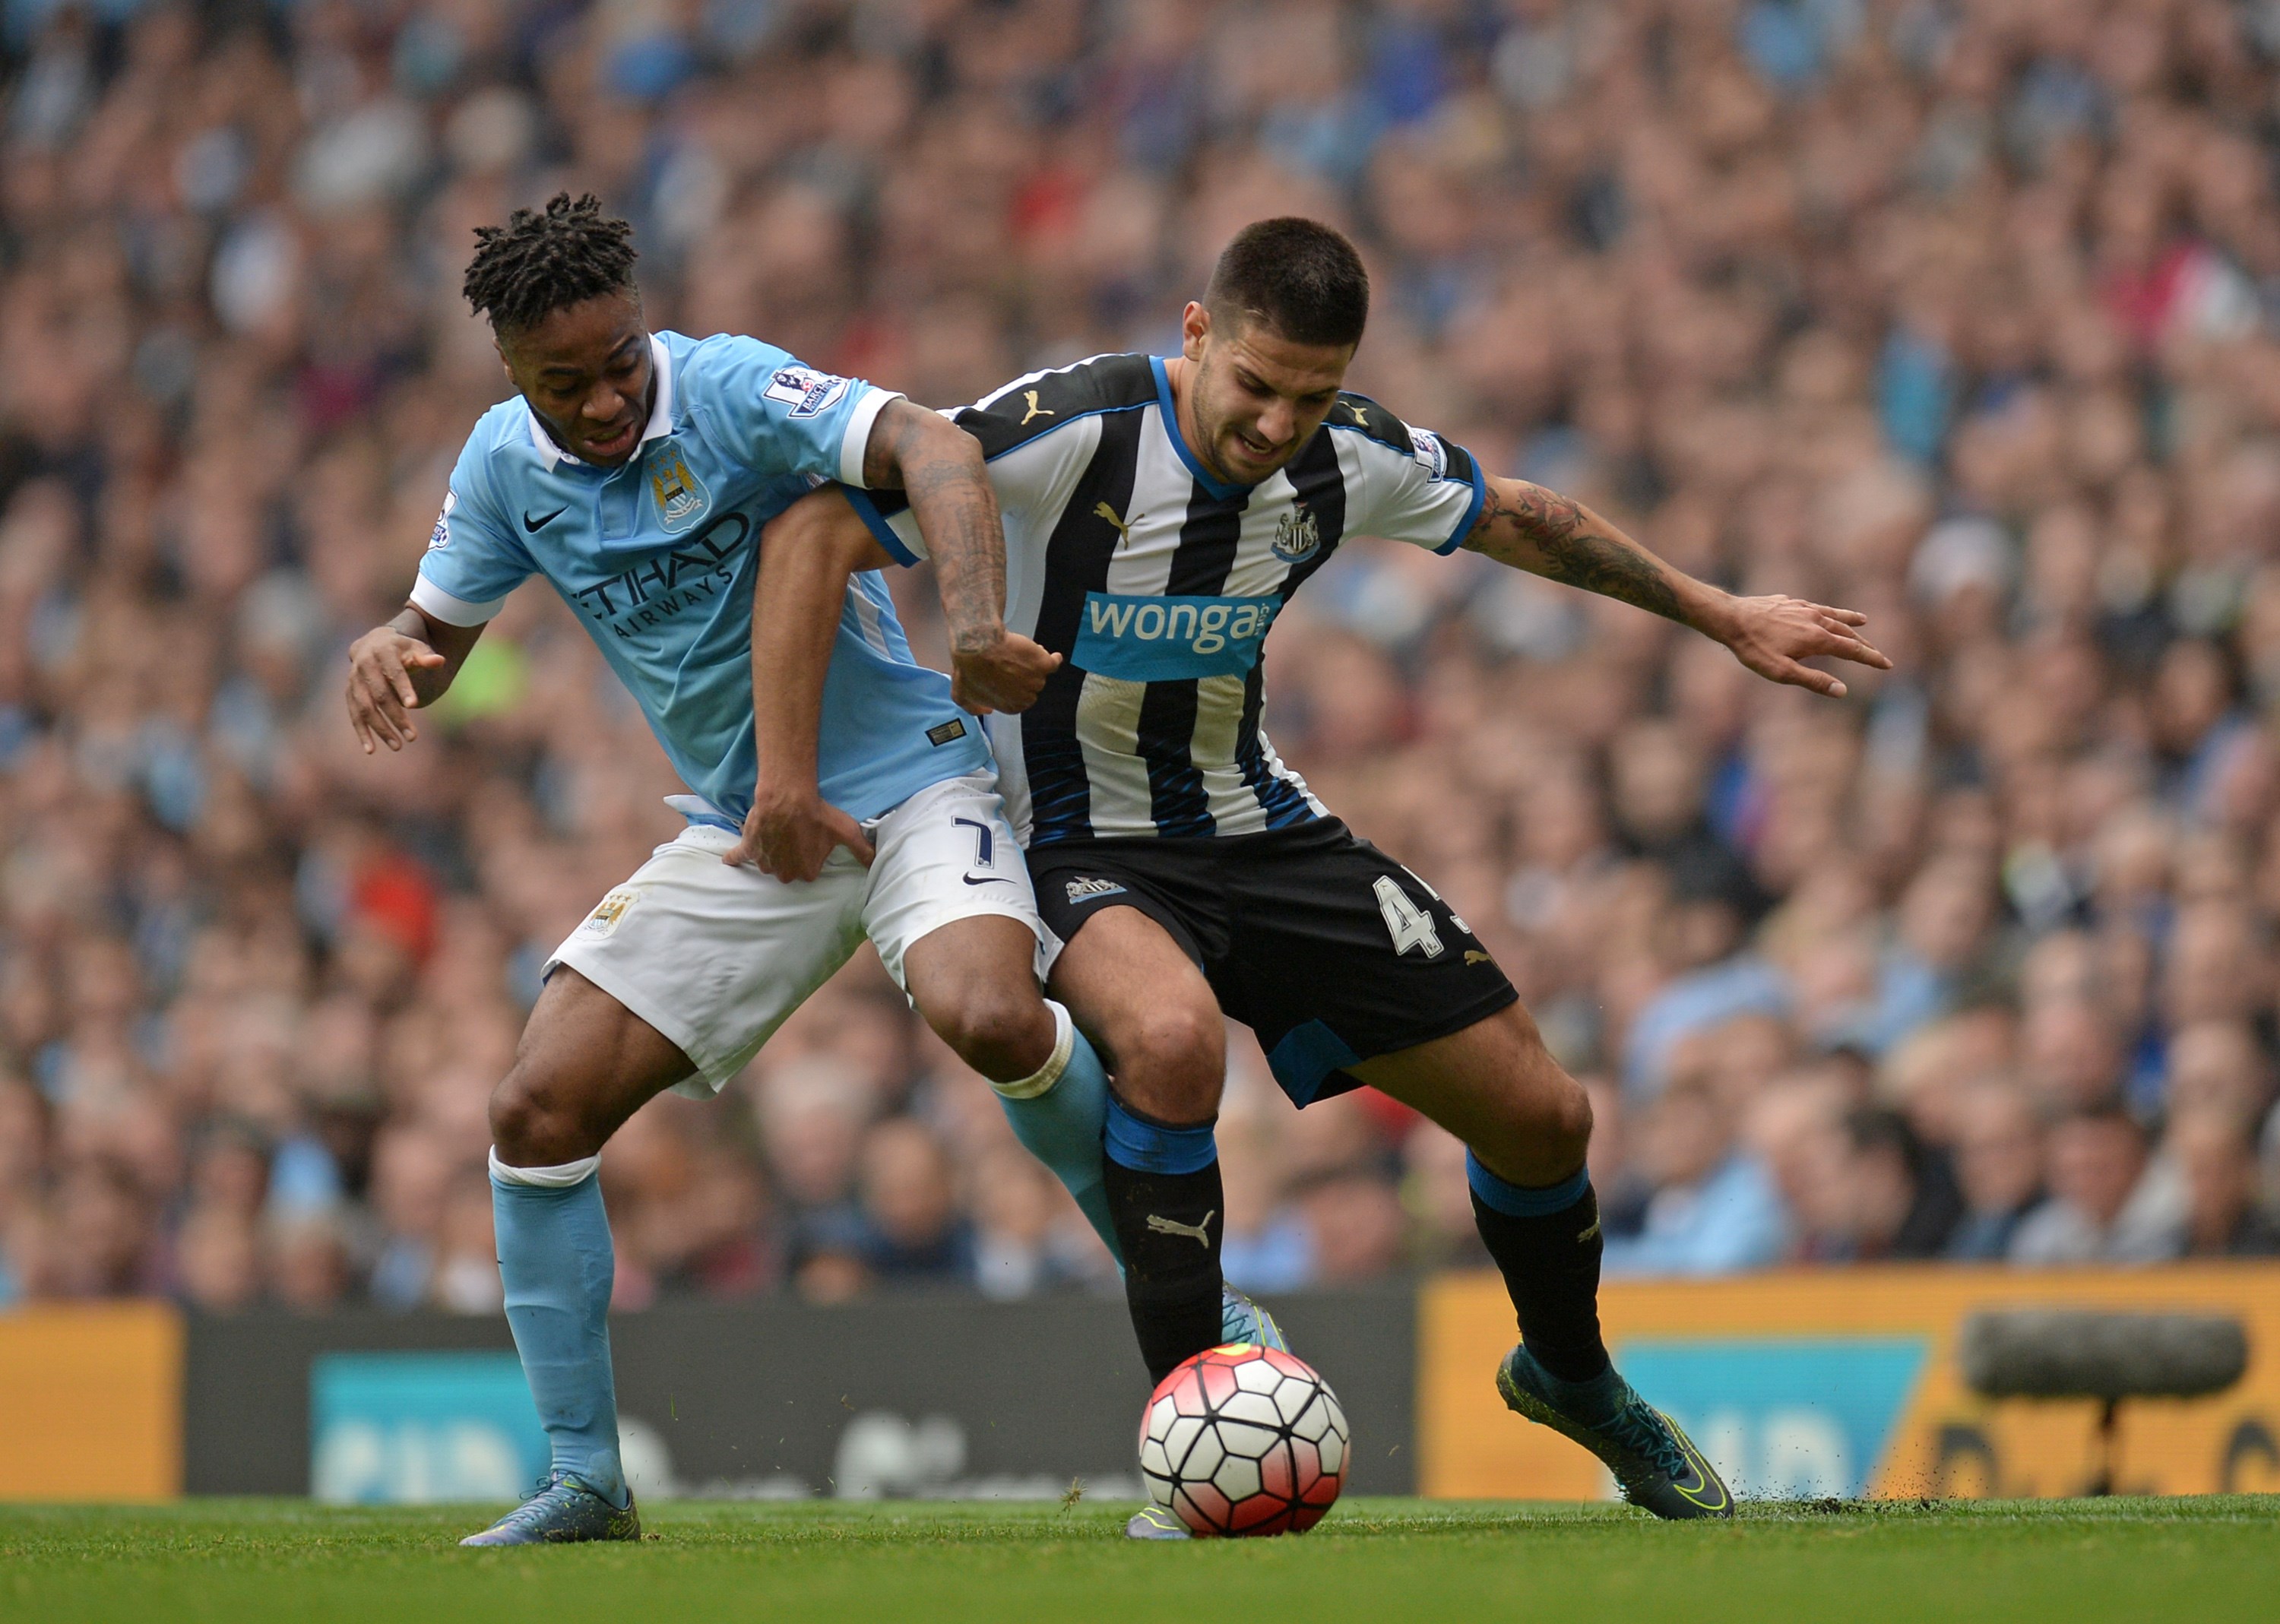 Manchester City's English midfielder Raheem Sterling (L) vies with Newcastle United's Serbian striker Aleksandar Mitrovic during the English Premier League football match between Manchester City and Newcastle United at The Etihad Stadium in Manchester, north west England on October 3, 2015. AFP PHOTO / OLI SCARFF

RESTRICTED TO EDITORIAL USE. No use with unauthorized audio, video, data, fixture lists, club/league logos or 'live' services. Online in-match use limited to 75 images, no video emulation. No use in betting, games or single club/league/player publications.        (Photo credit should read OLI SCARFF/AFP/Getty Images)